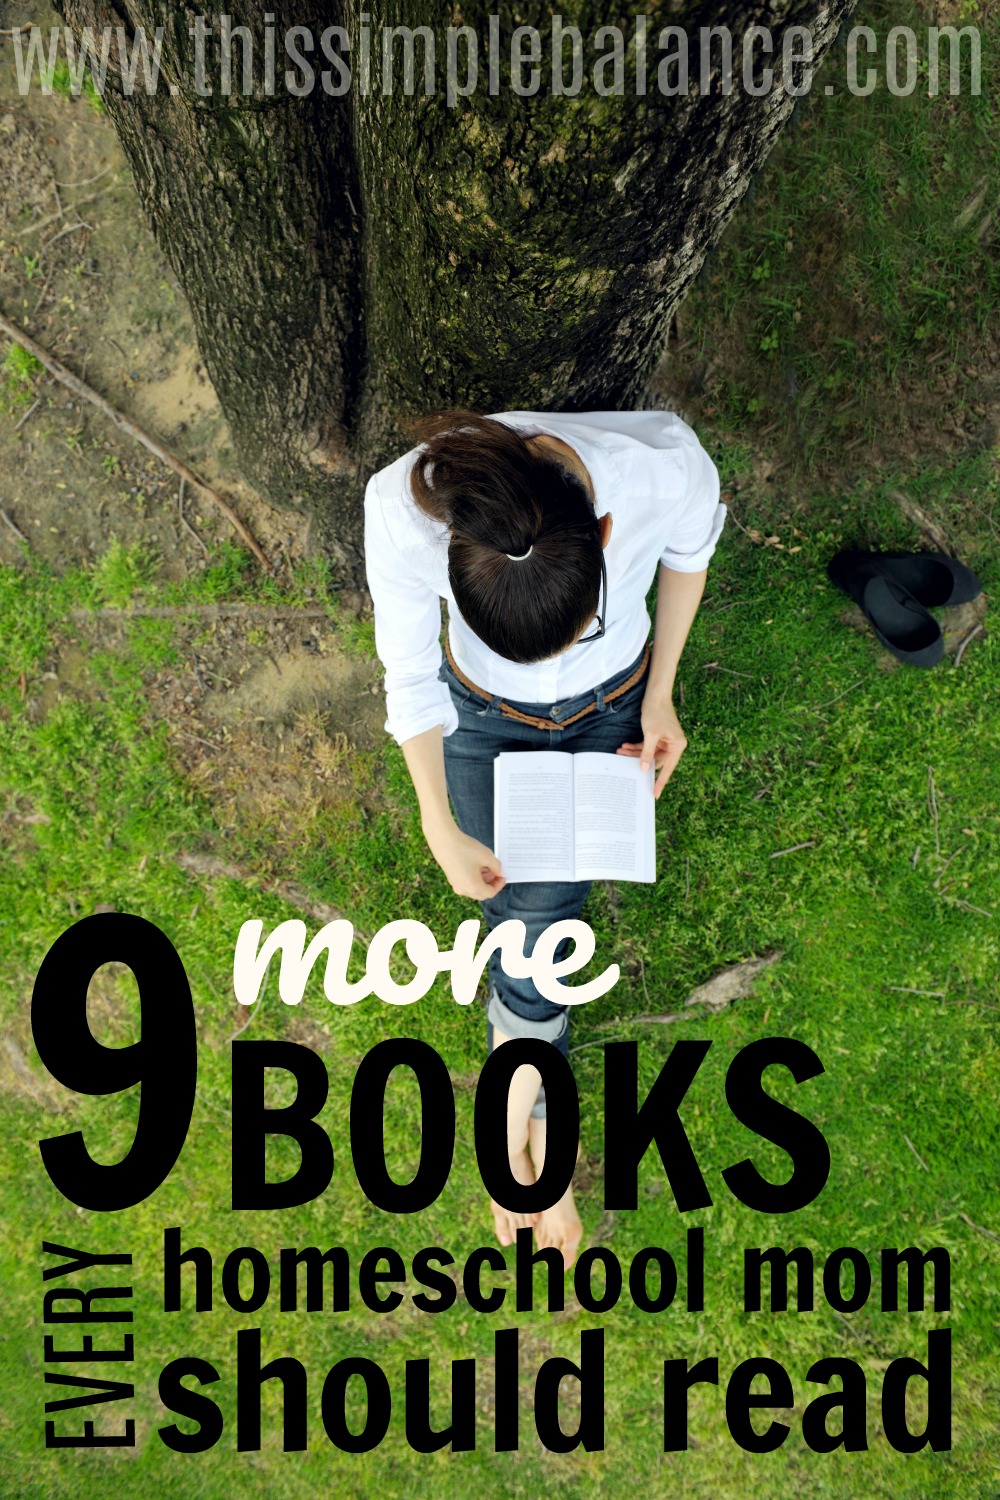 homeschool mom reading a homeschooling book while sitting with her back against a tree, with text overlay "9 more books every homeschool mom should read"